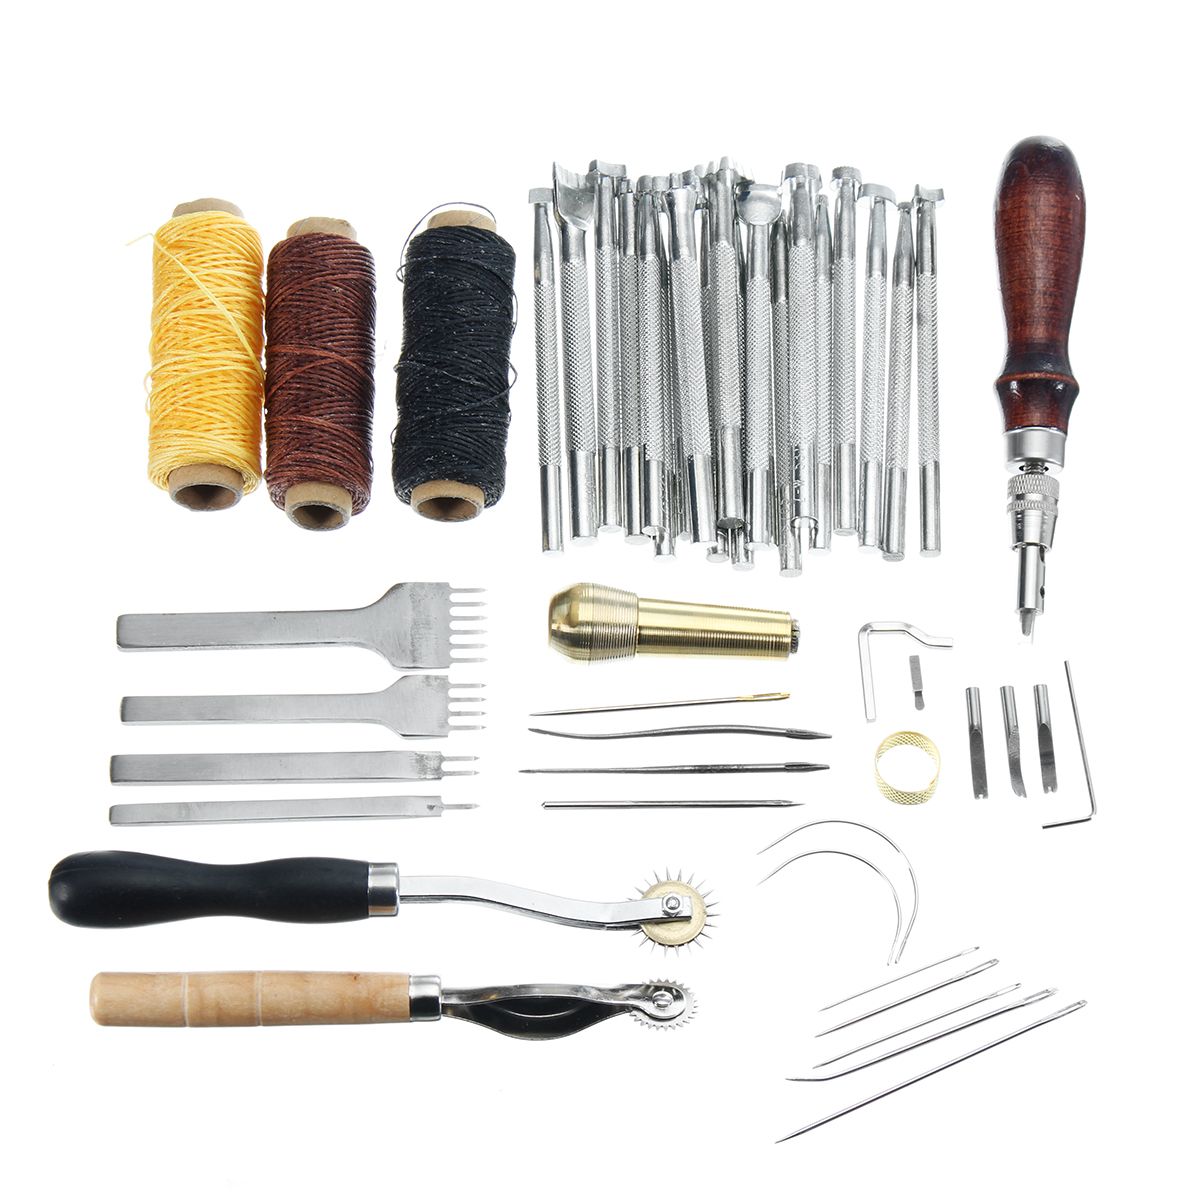 Leather-Craft-Tool-Hand-Stitching-Sewing-Tool-Thread-Awl-Waxed-Thimble-Kit-1248303